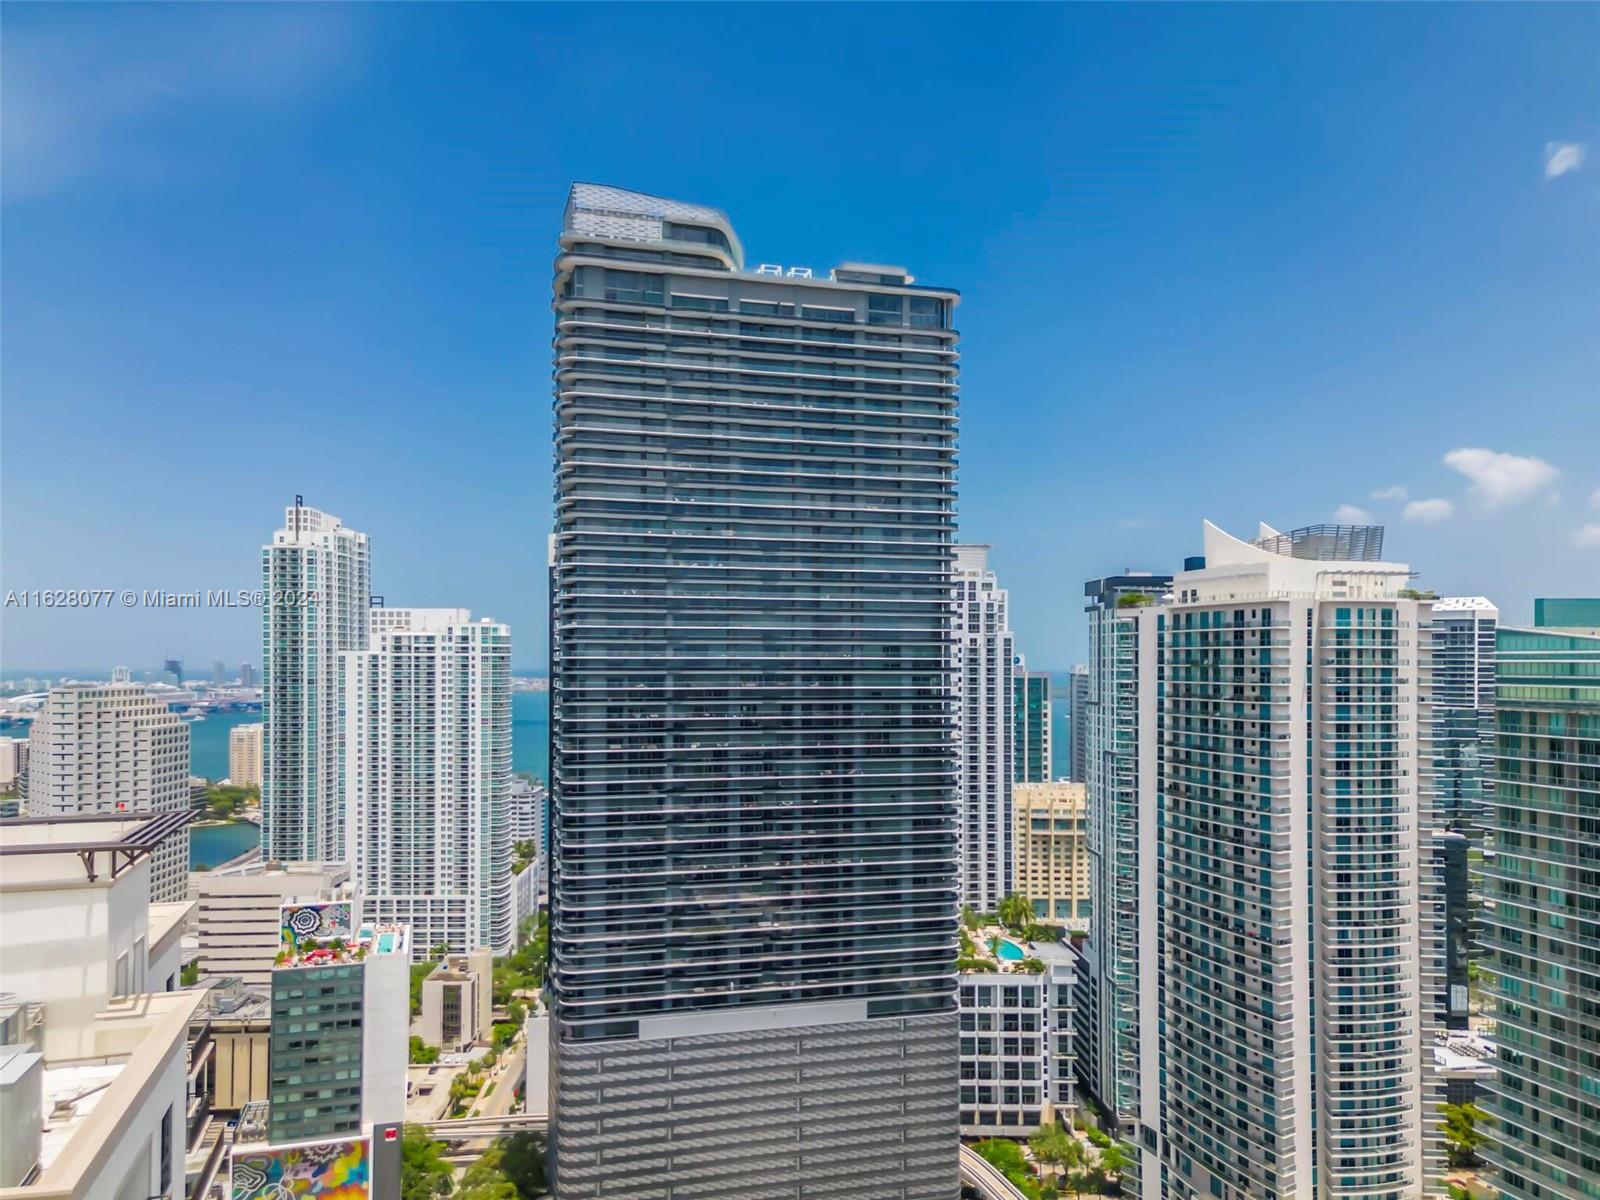 Fabulous 3 bedroom, 3.5 baths corner unit facing south, great views of  bay and Brickell skyline. 
Turn key unit being sold fully furnished. Professionally decorated with imported finishes & furniture.
Immaculate unit with floor to ceiling glass doors, plenty of natural light,  wrap around balconies, Italian kitchen & marble baths.  Imported wall paper, window coverings & lighting fixtures. All closets are built-in, includes 3 parking spaces-2 assigned & 1 valet. 
Great building with fabulous amenities that include: rooftop pool & spa with state-of-the-art equipment, massage rooms, sauna, steam, lap pool on 18th floor, children's playroom, Cinema, management in house, pool table & party room. 
Building is solid financially, with great management in house & 24 hour security.